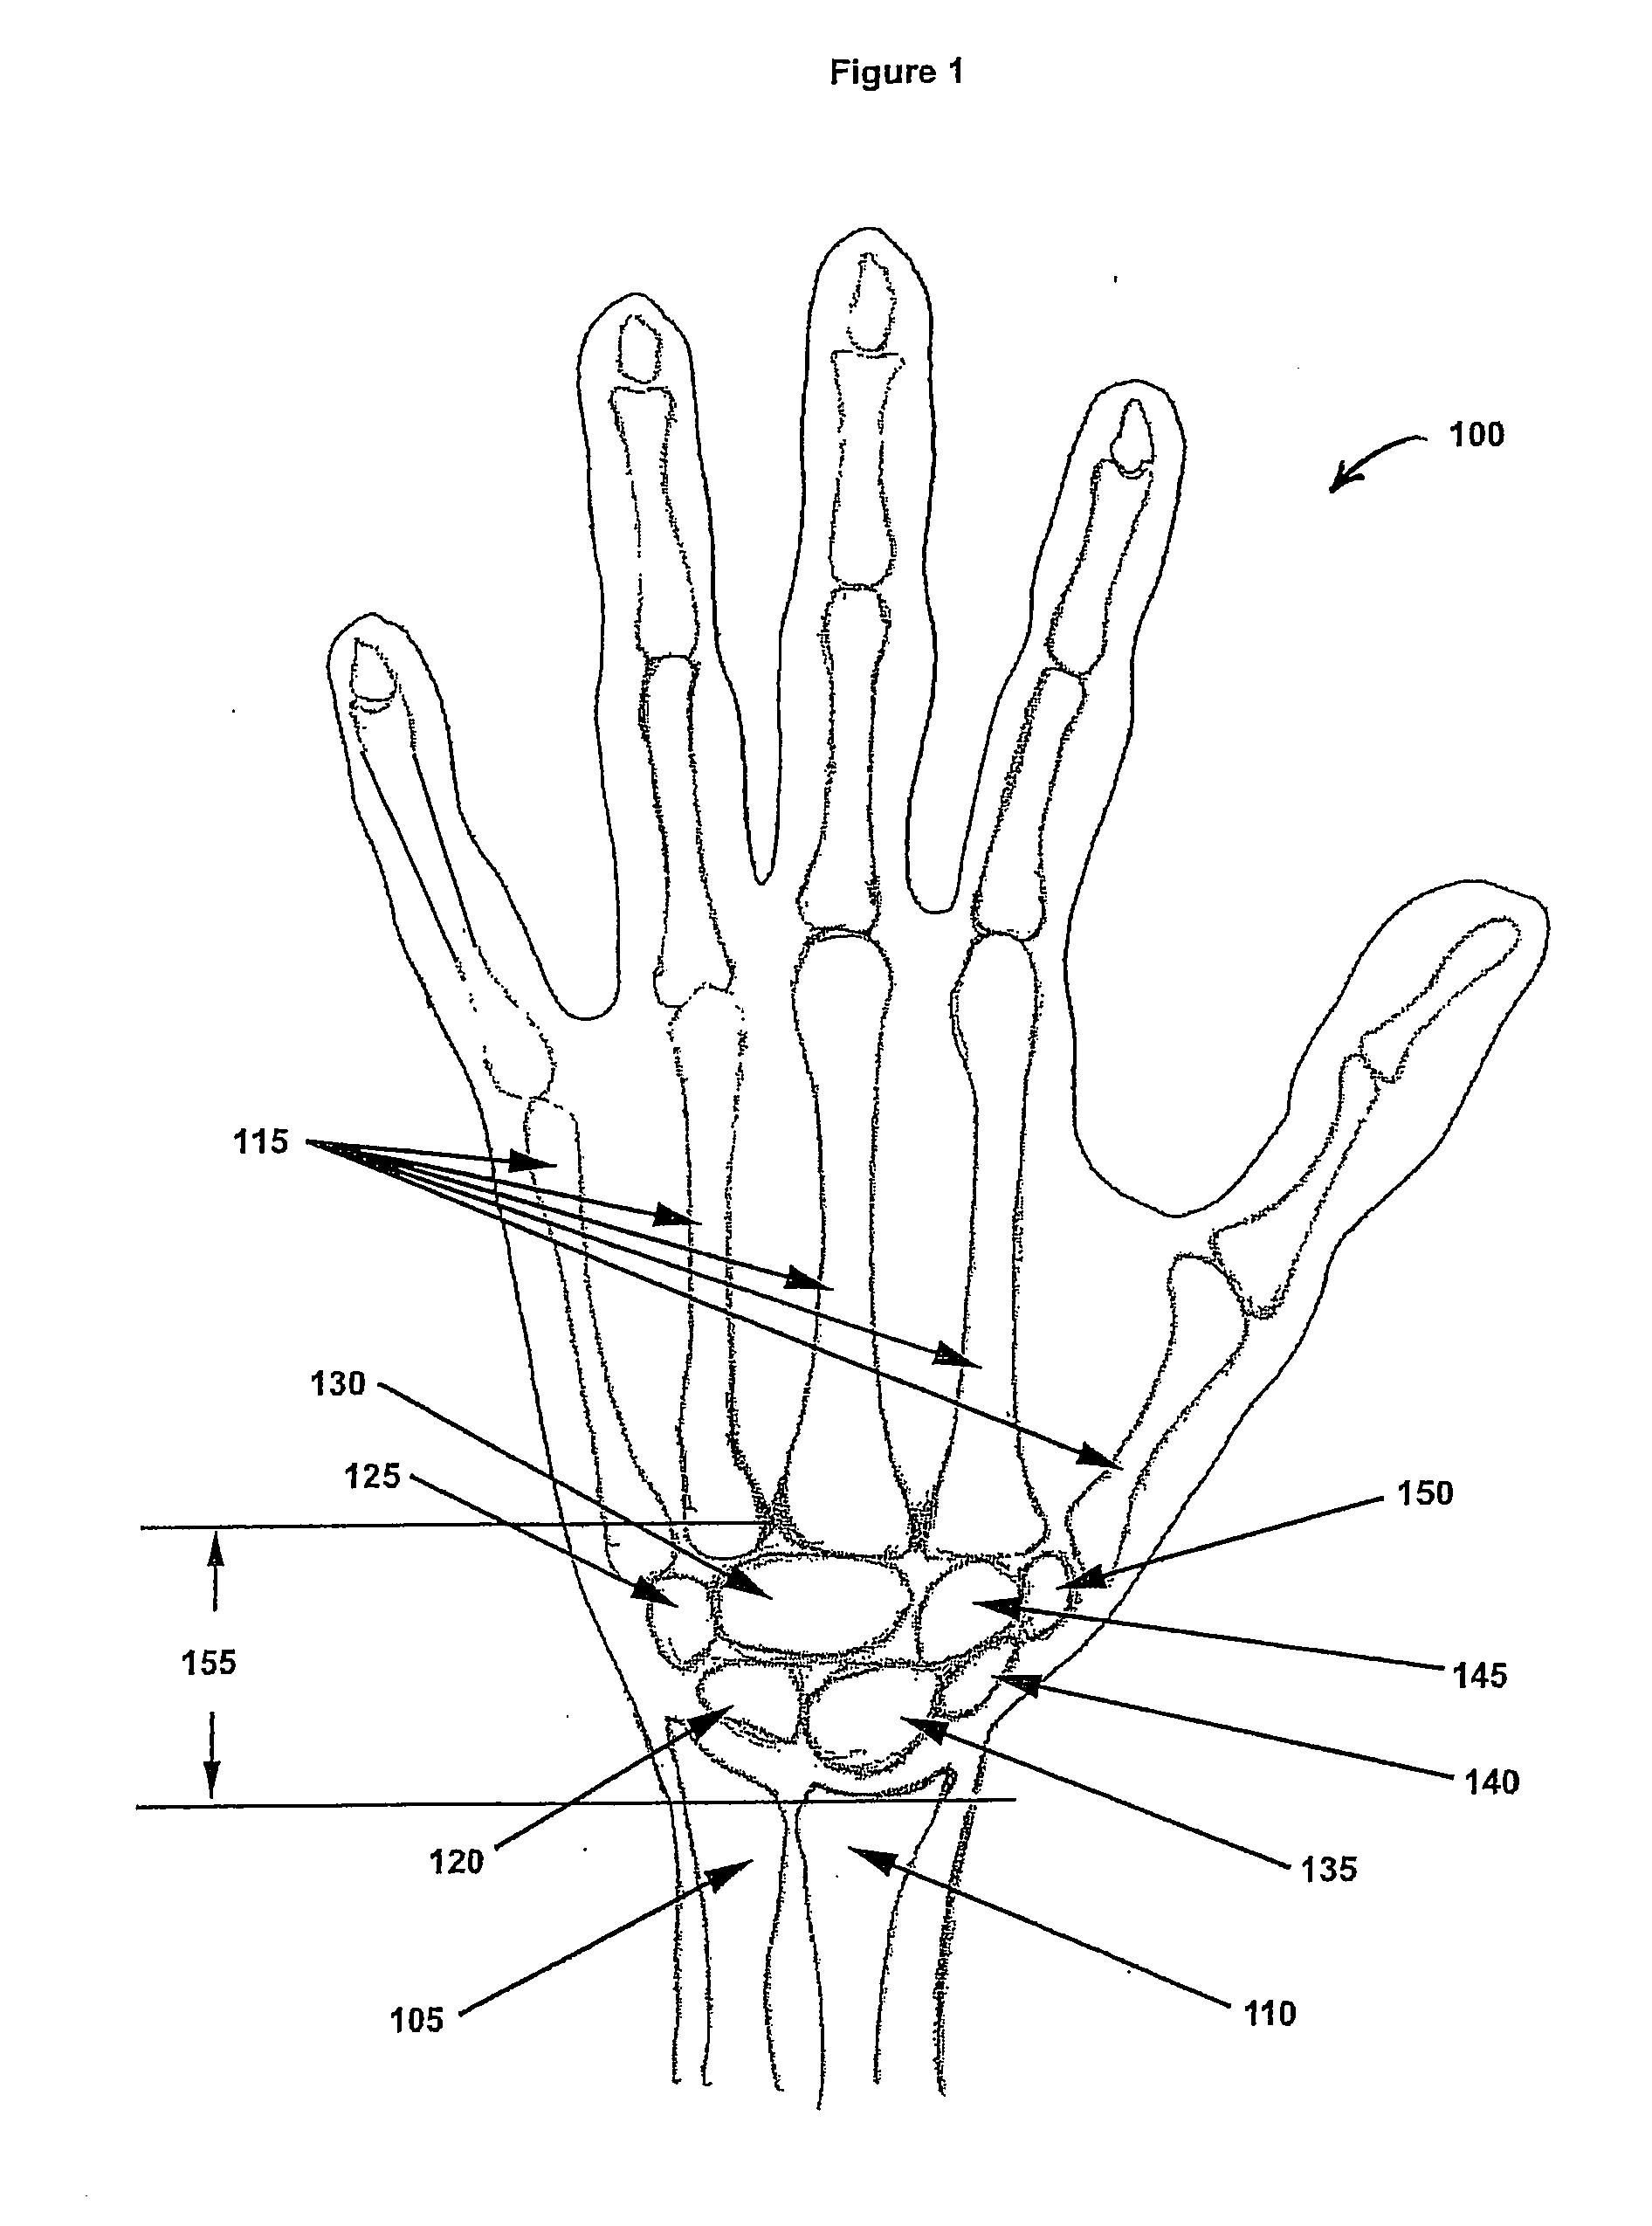 System and method for simultaneously applying a plurality of therapeutic modalities to treat carpal tunnel syndrome